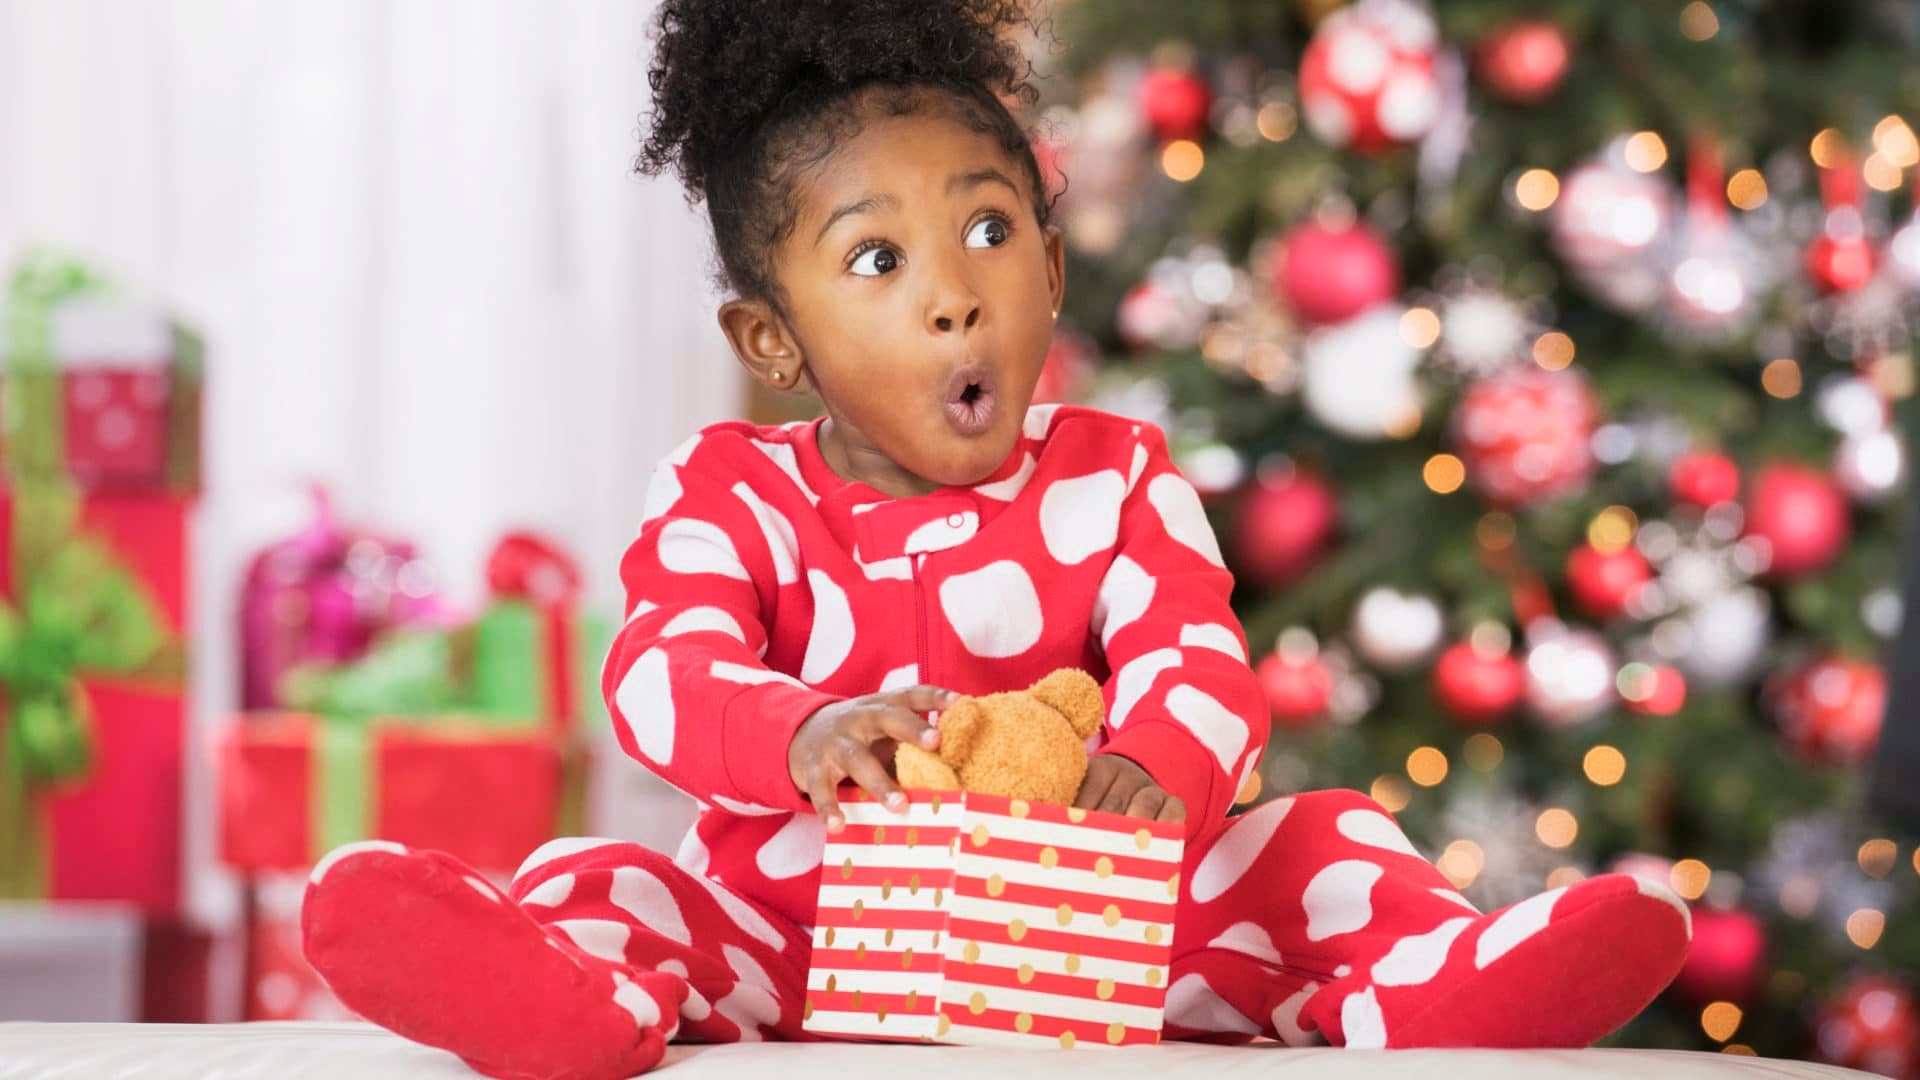 Child Christmas Gift Ideas
 The Best Last Minute Christmas Gift Ideas for Kids at